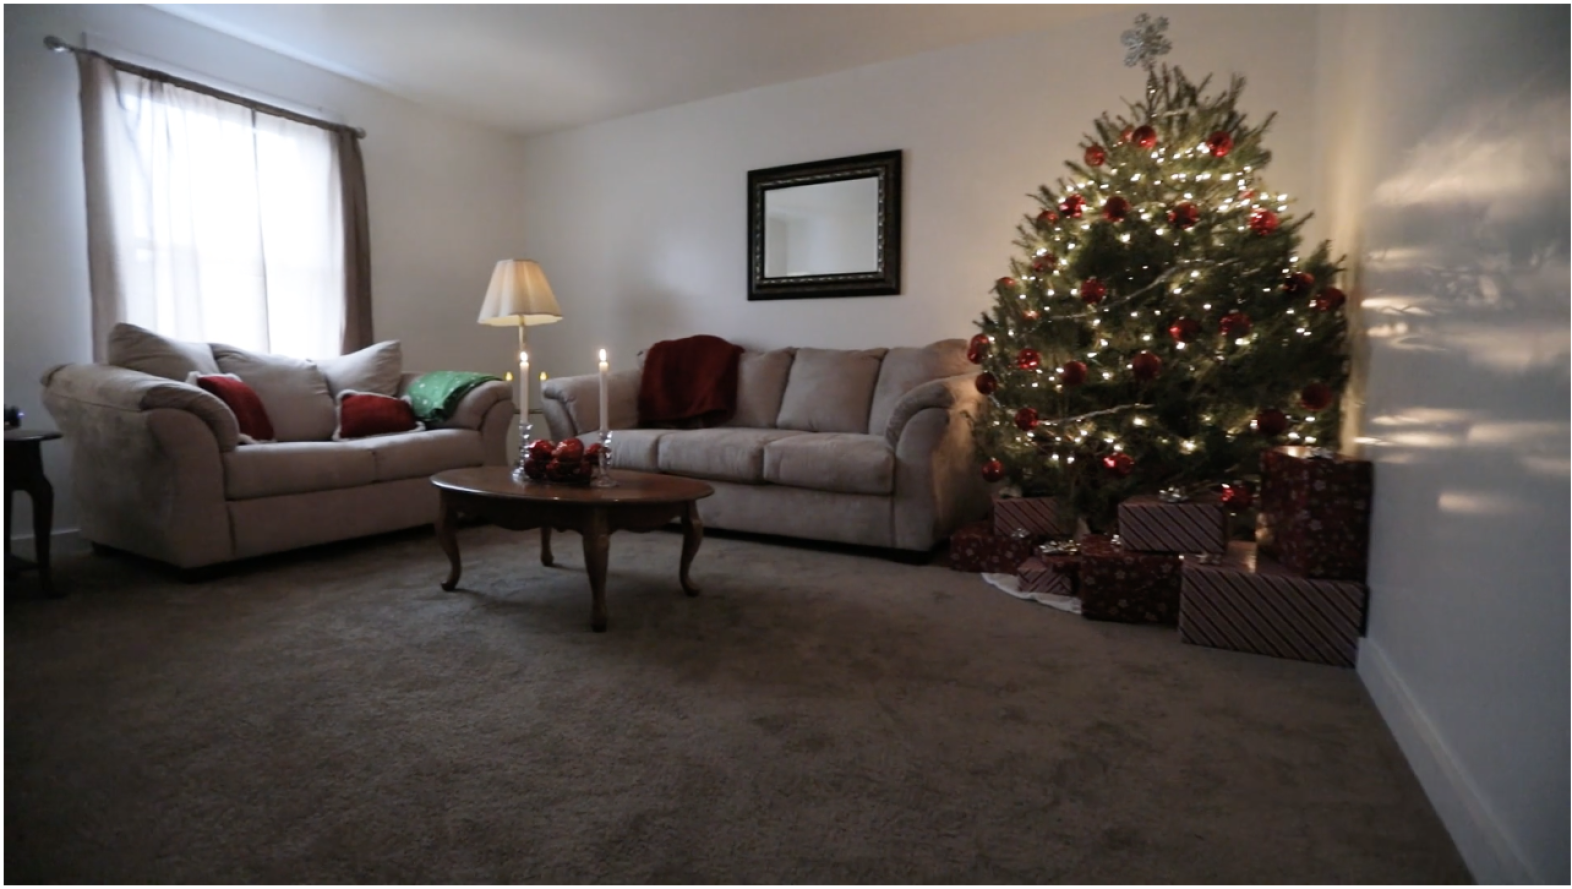 Living room with holiday decorations and a Christmas tree